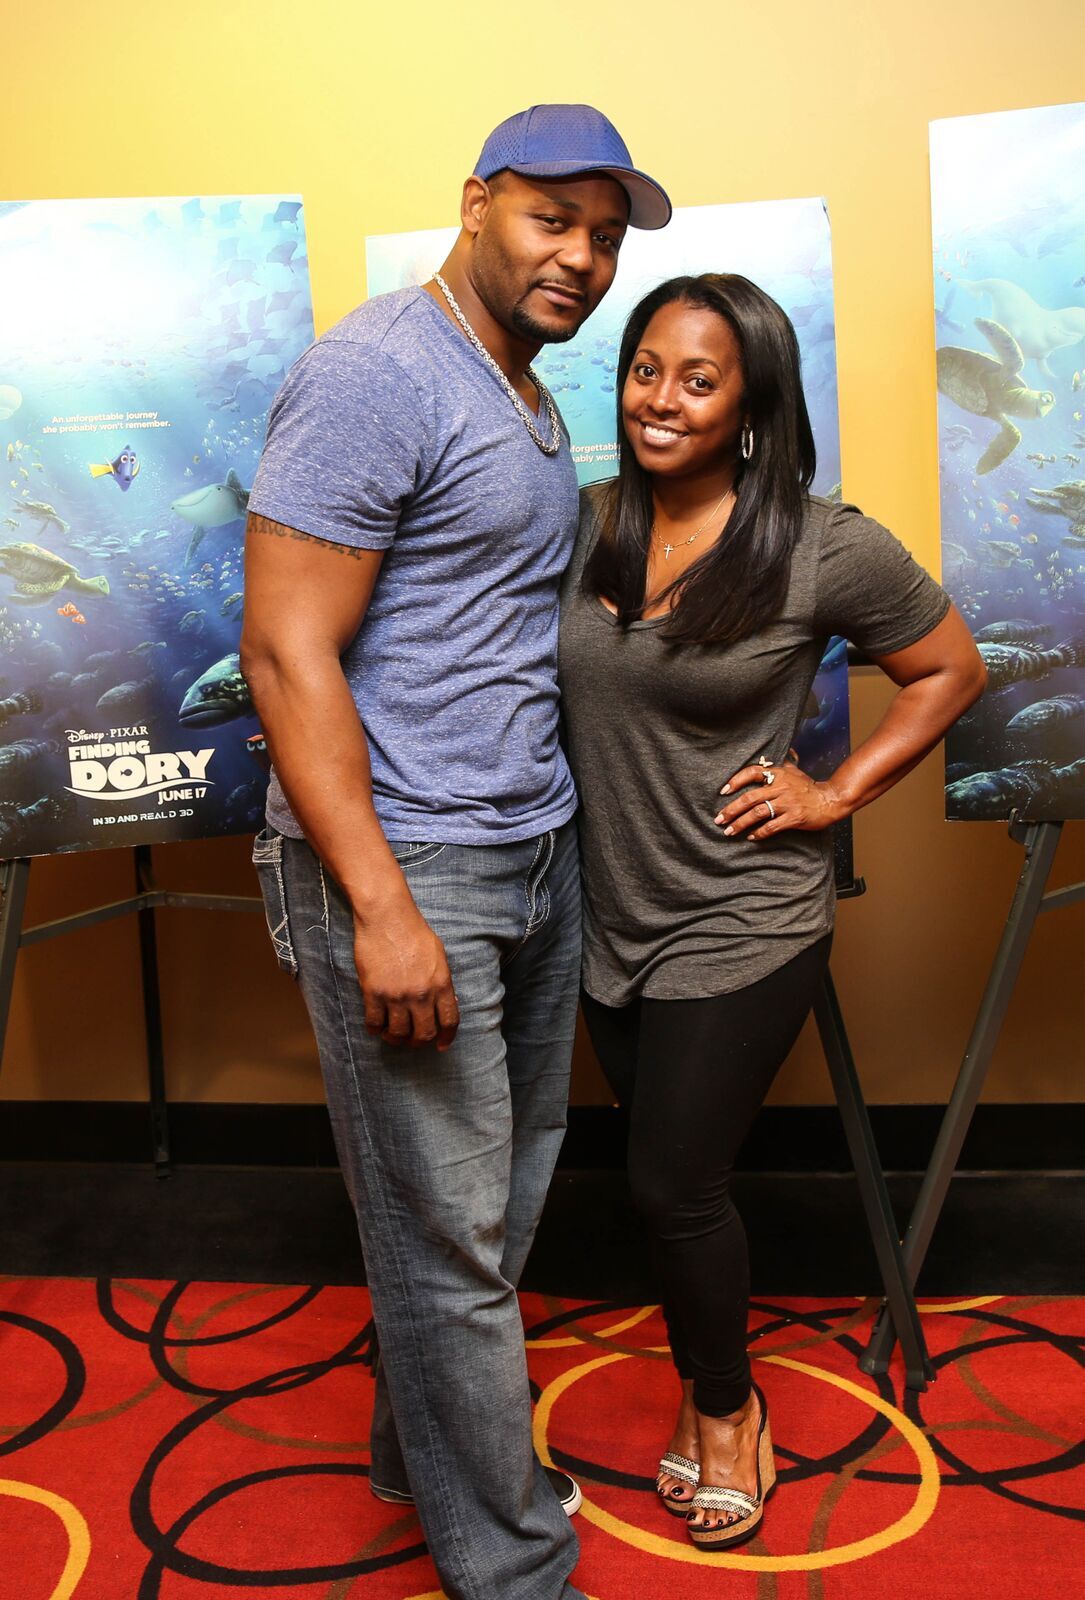 Keshia Knight Pulliam and Ed Hartwell attend 'Finding Dory' advance screening at AMC Phipps Plaza on June 15, 2016 in Atlanta, Georgia. | Source: Getty Images